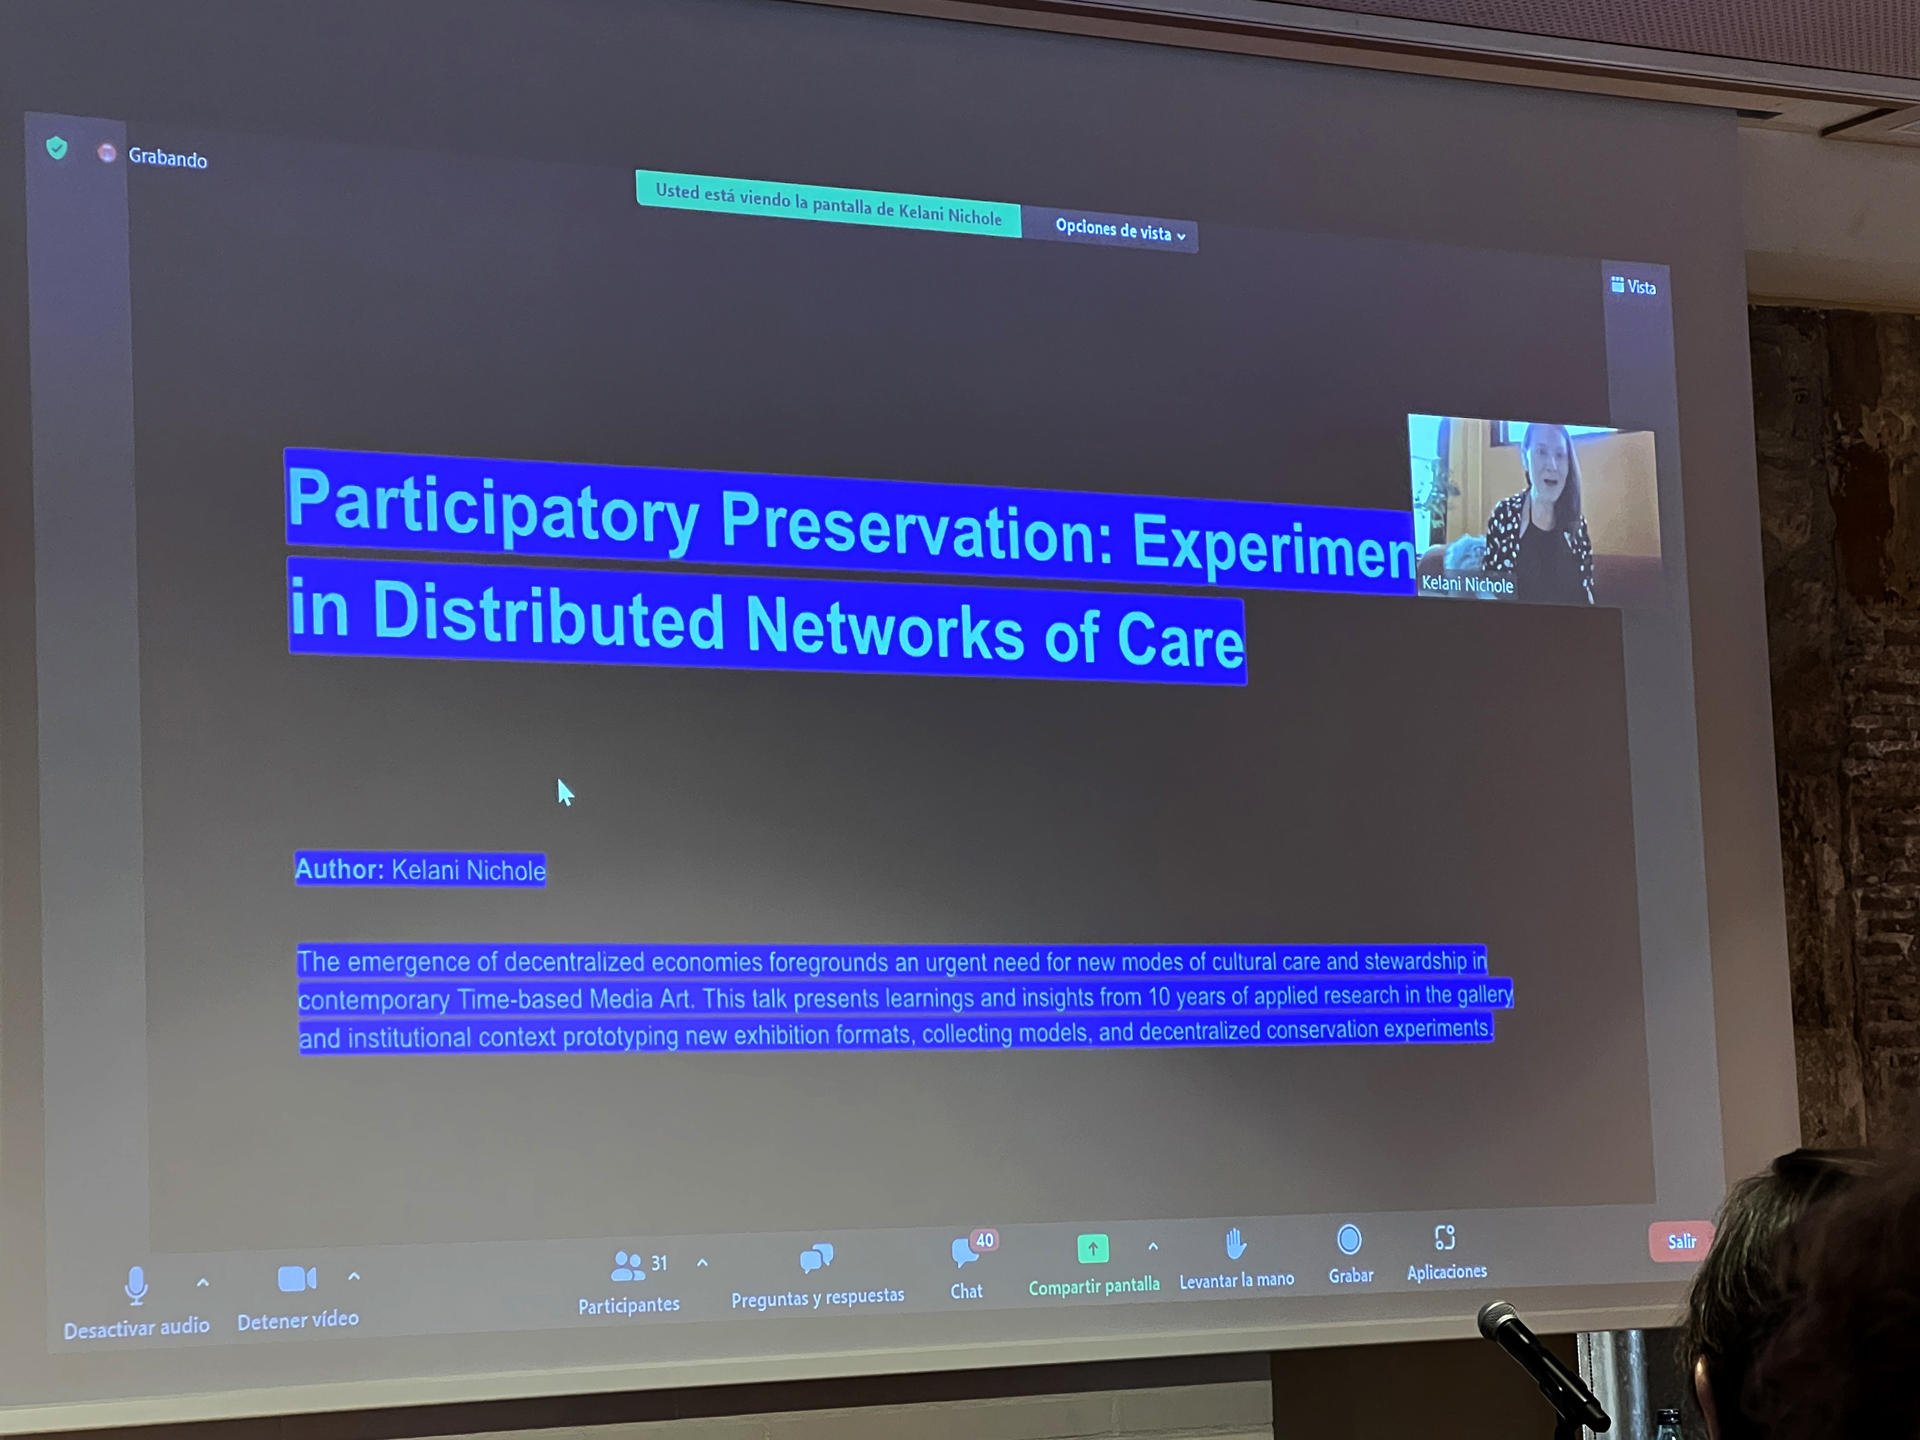 ©ISEA2022: 27th International Symposium on Electronic Art, Kelani Nichole, Participatory Preservation: Experiments in Distributed Networks of Care